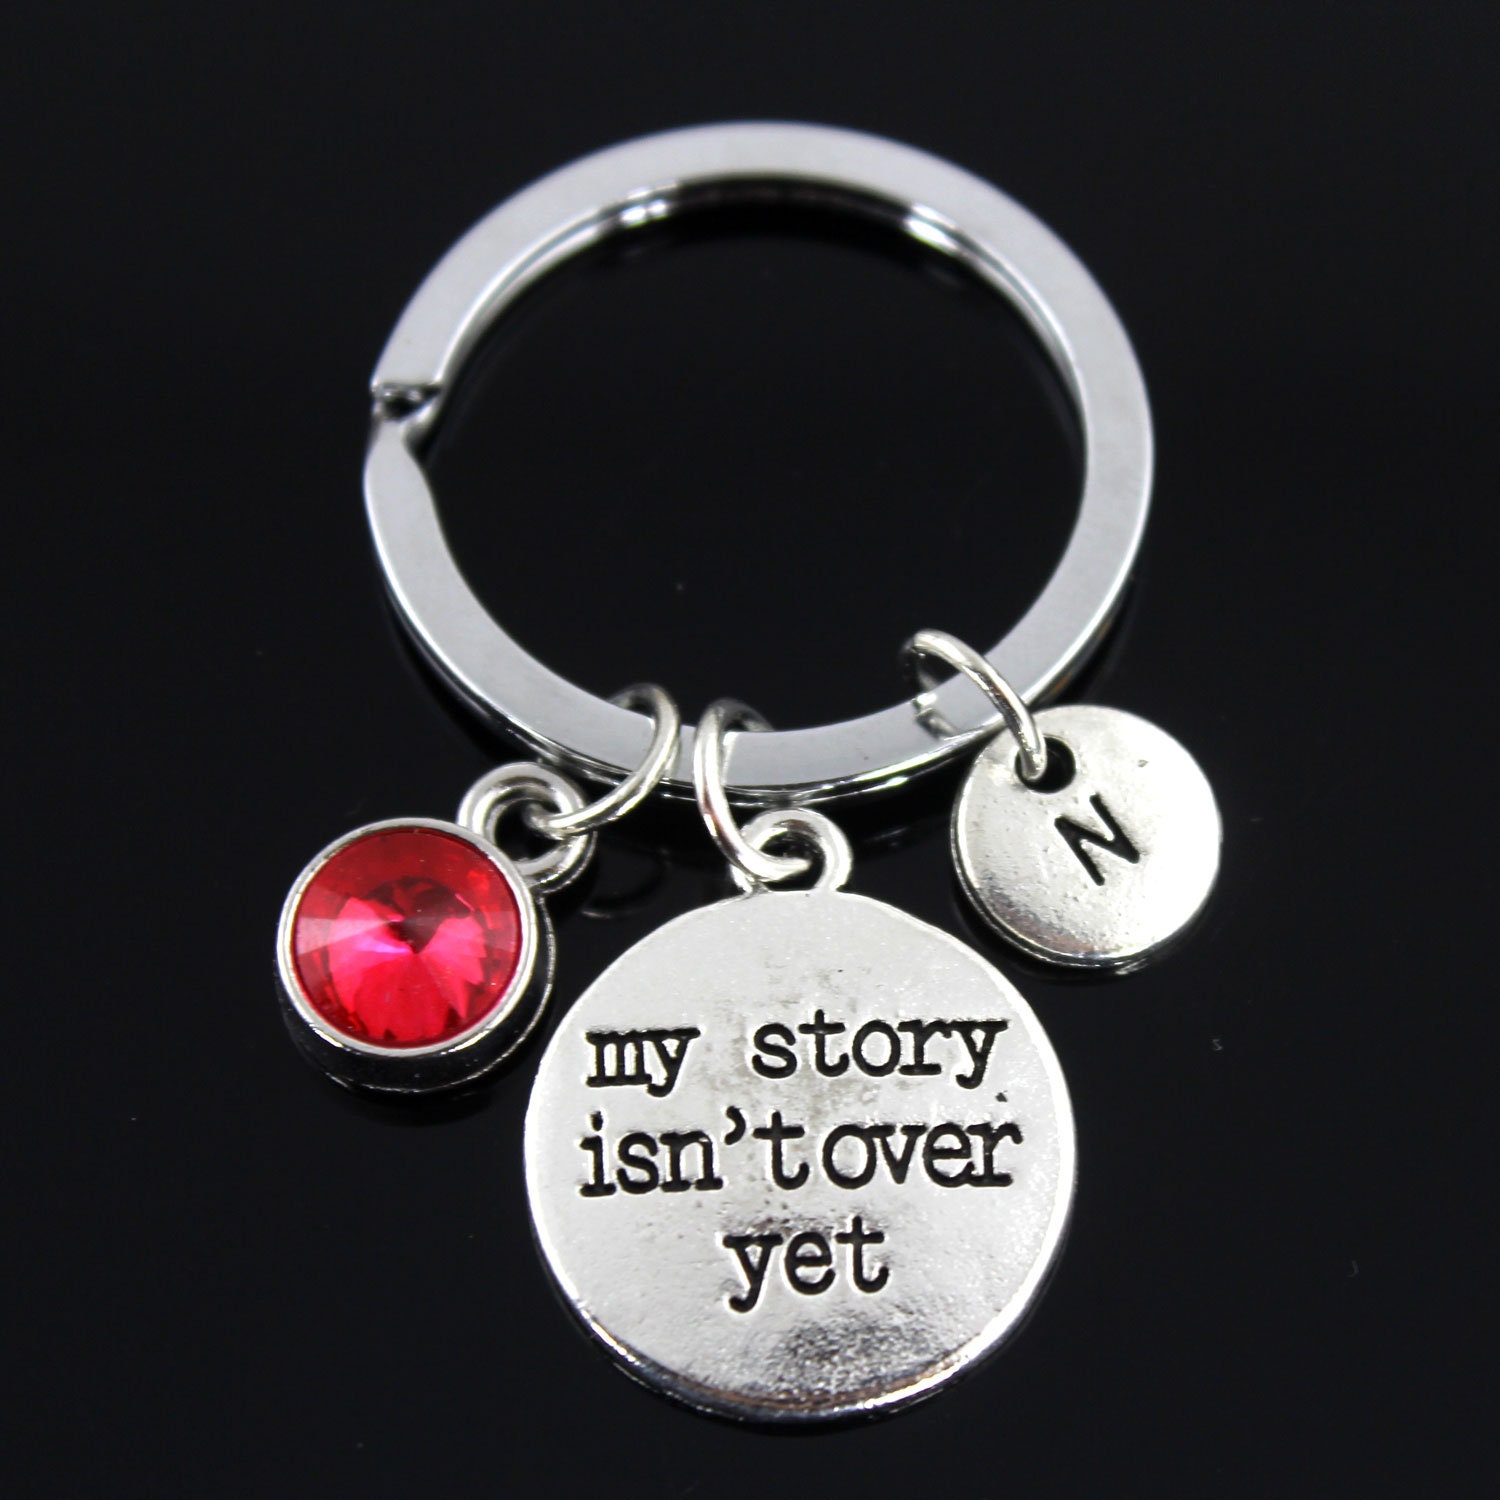 Personalized Keychain/My Story Isn't Over Yet Keychain/Graduation Keychain/Gift For Her Him